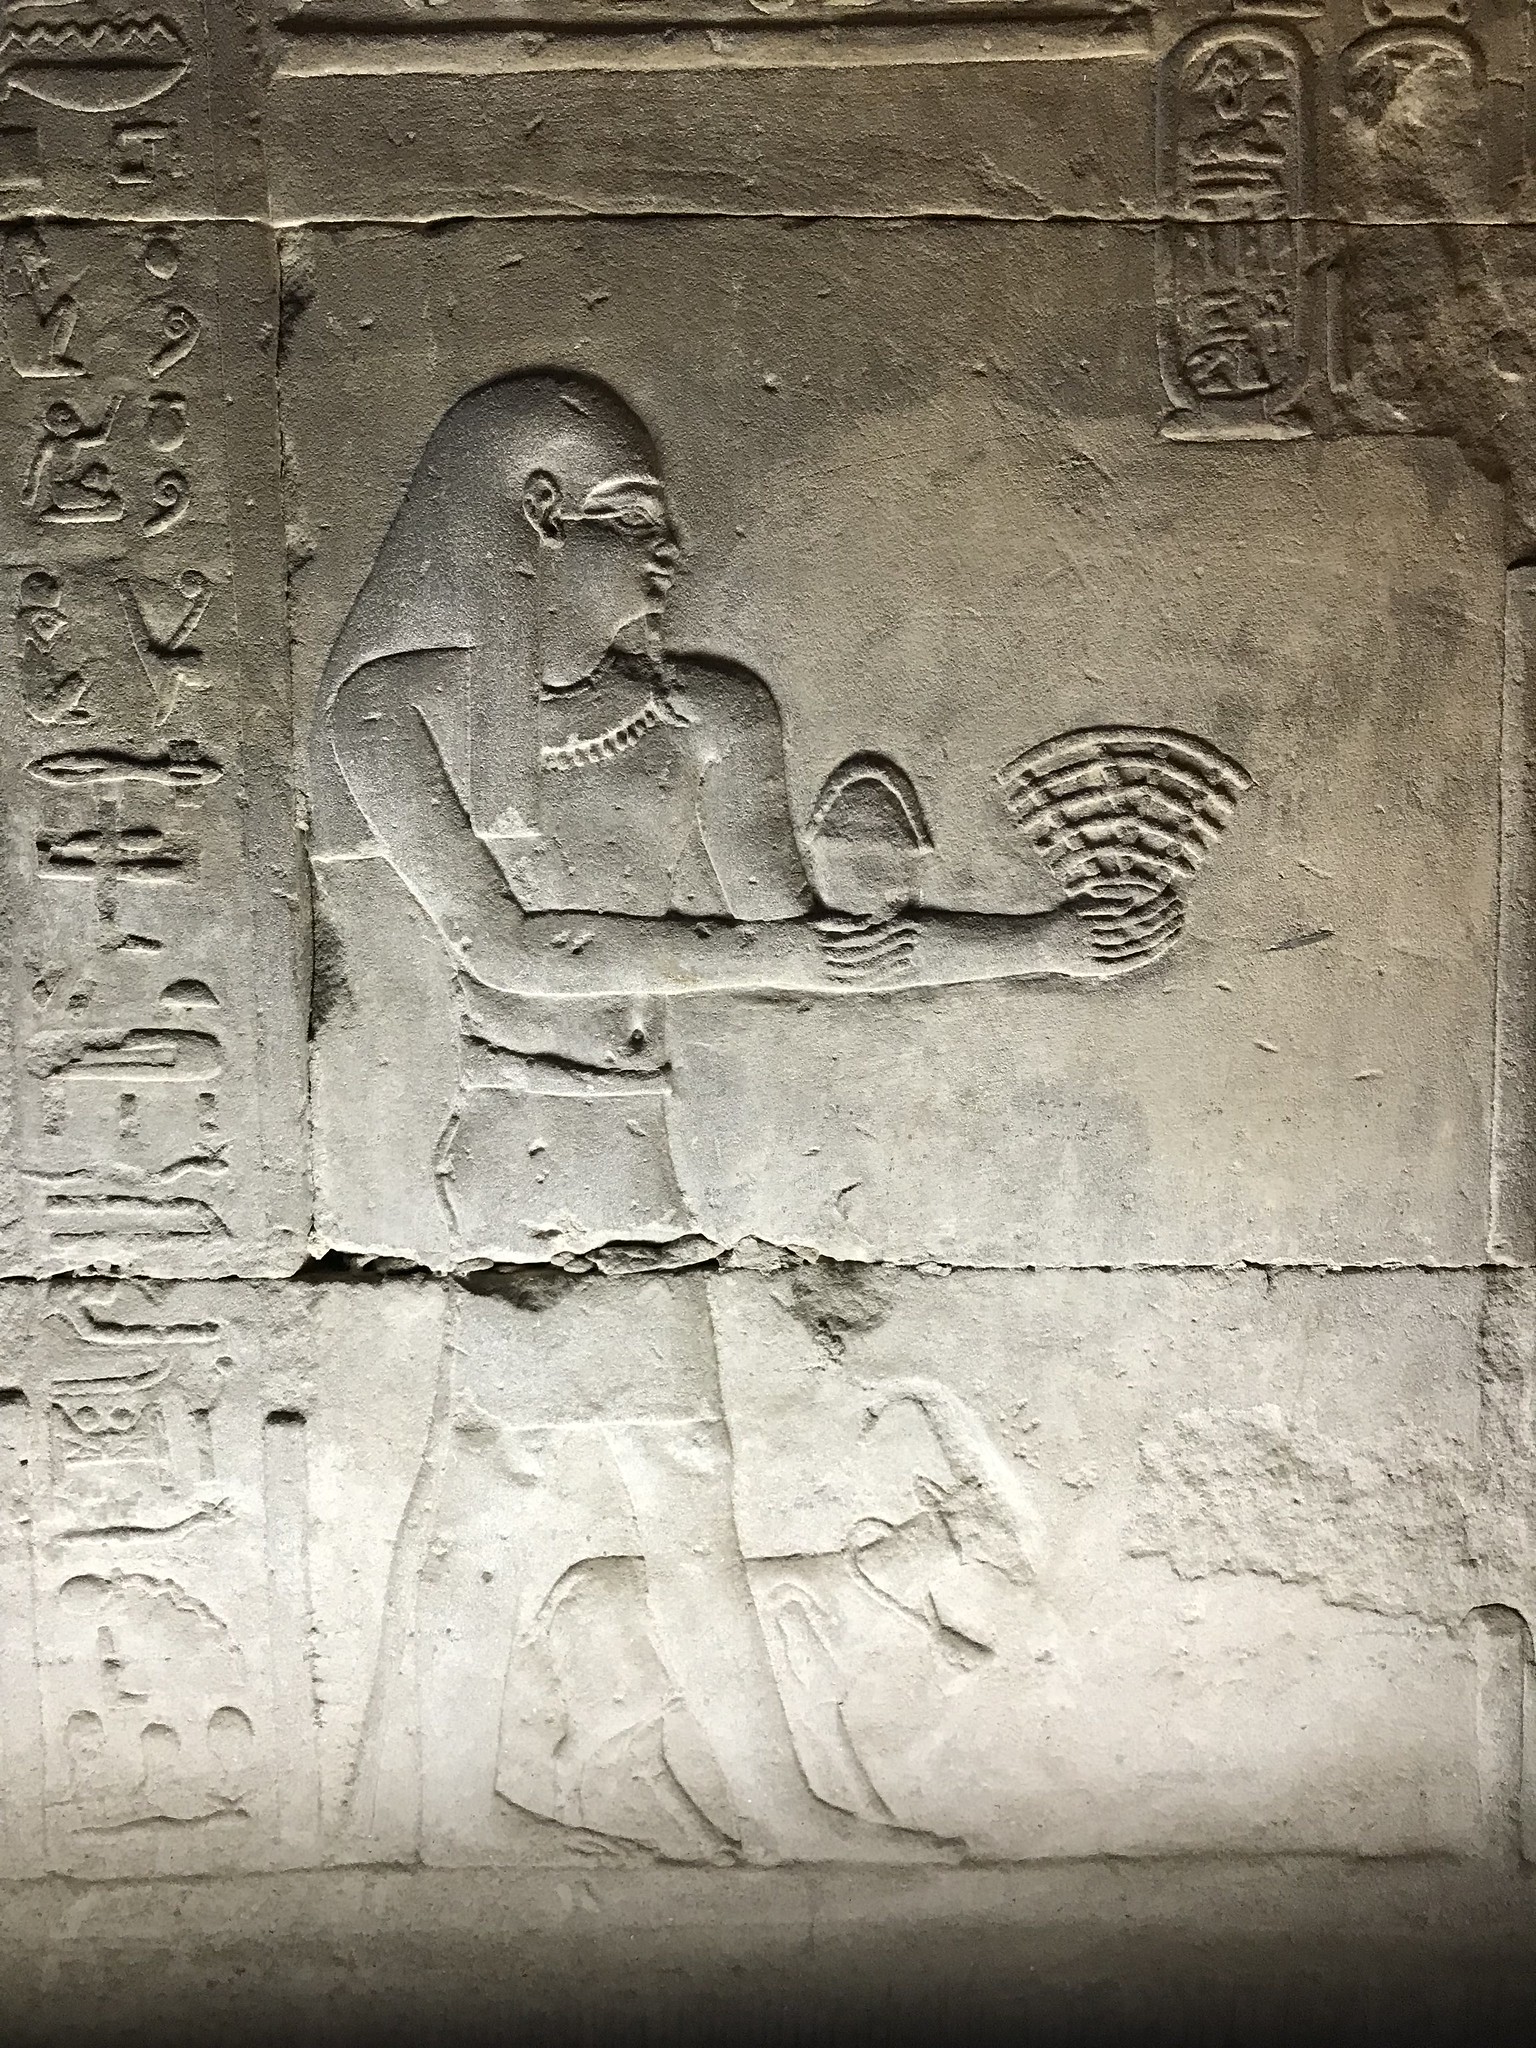 Picture of a carving from a Egyptian temple that some claim depict a Wi-FI symbol